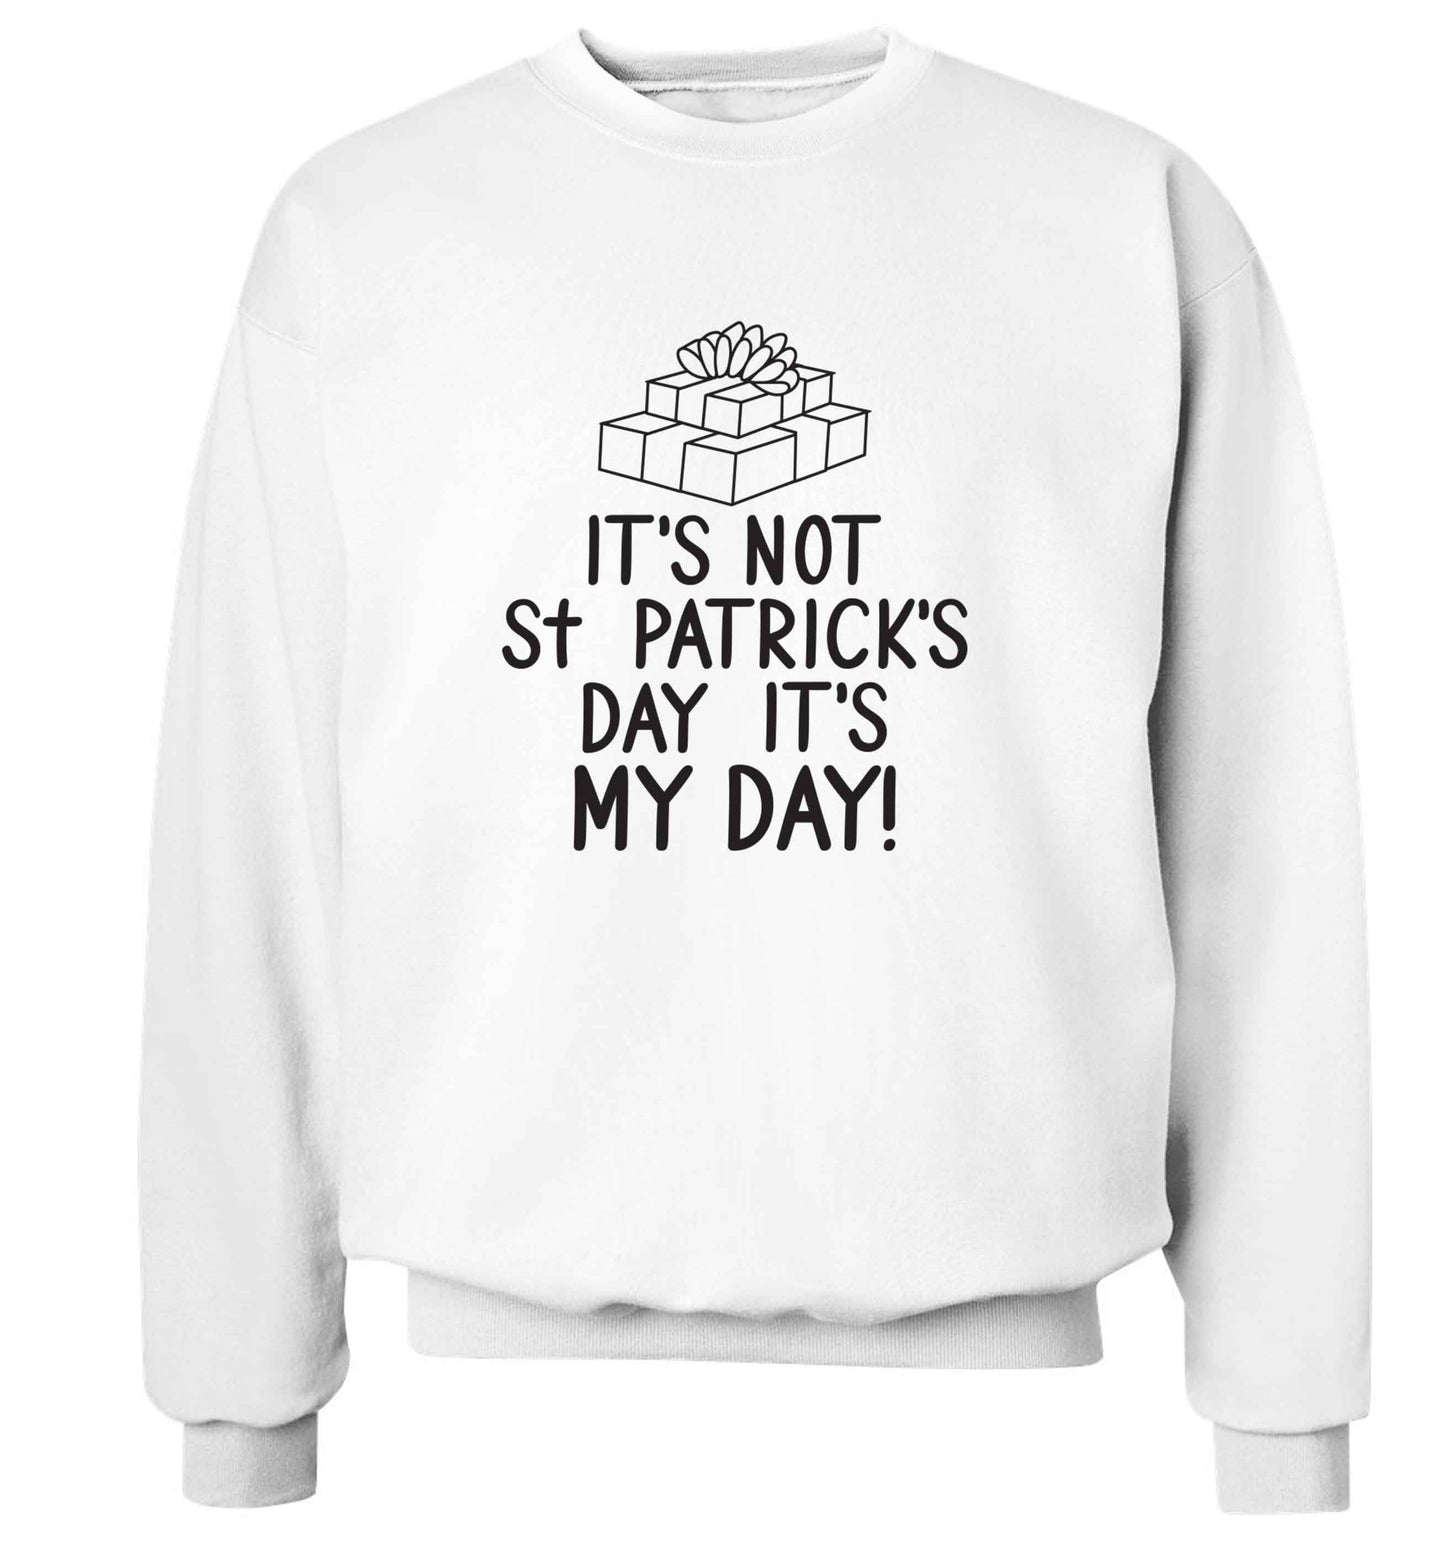 Funny gifts for your mum on mother's dayor her birthday! It's not St Patricks day it's my day adult's unisex white sweater 2XL